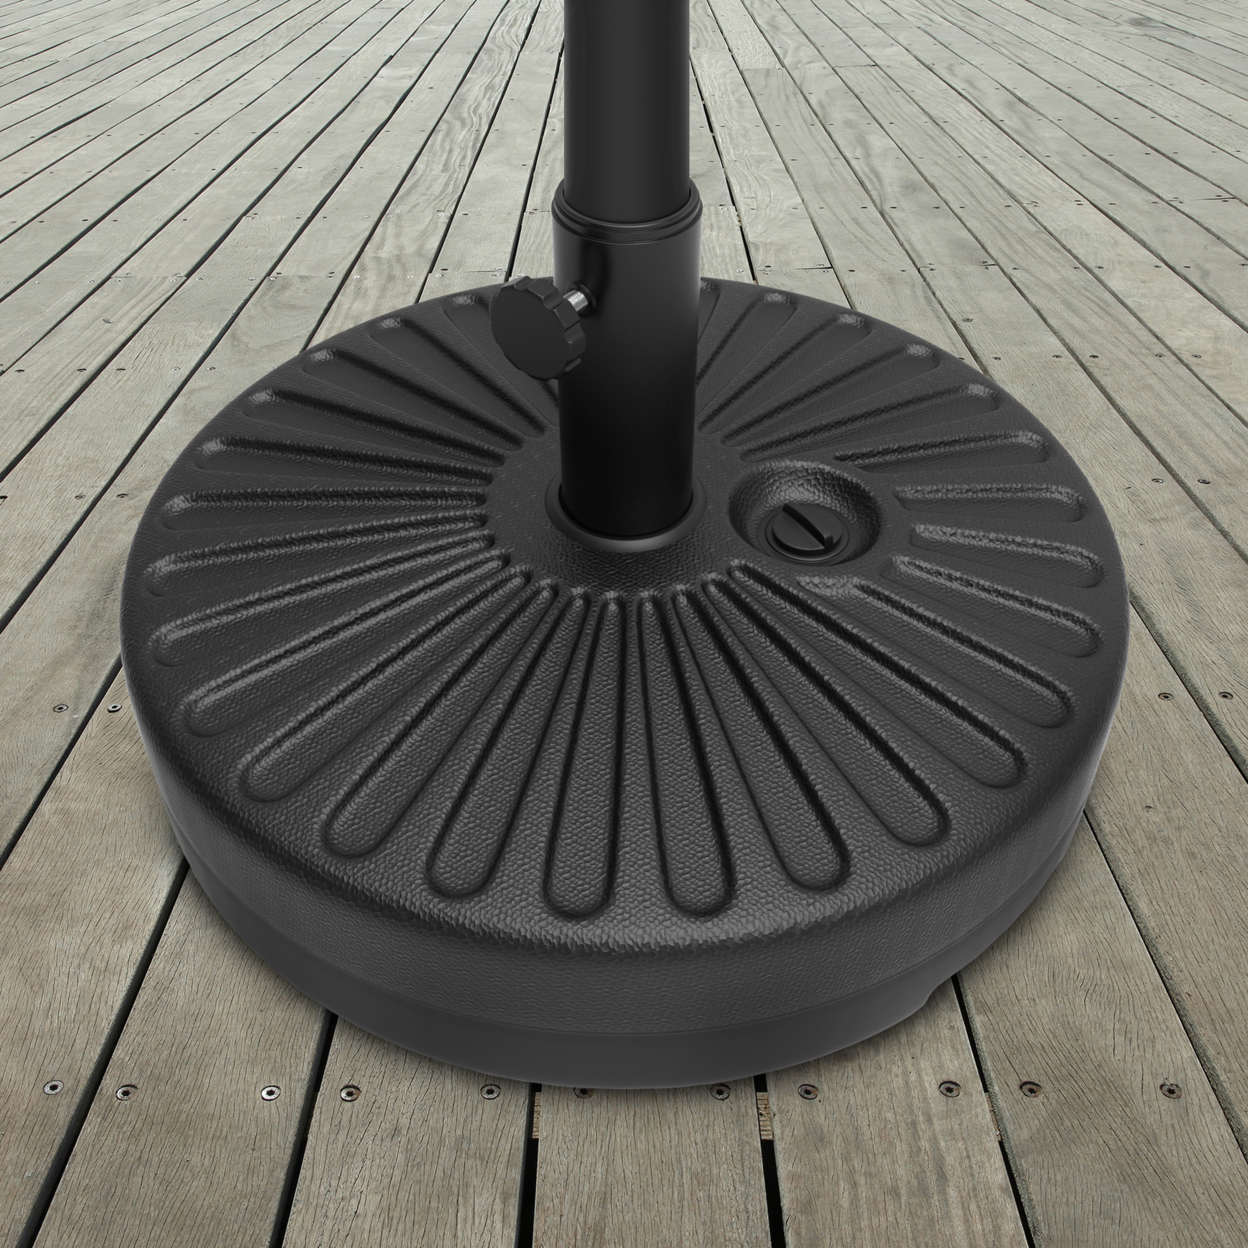 Patio Umbrella Base Weighted Round Umbrella Holder- Fill With Sand - For Use Outdoors On Decks, Balconies Or Poolside